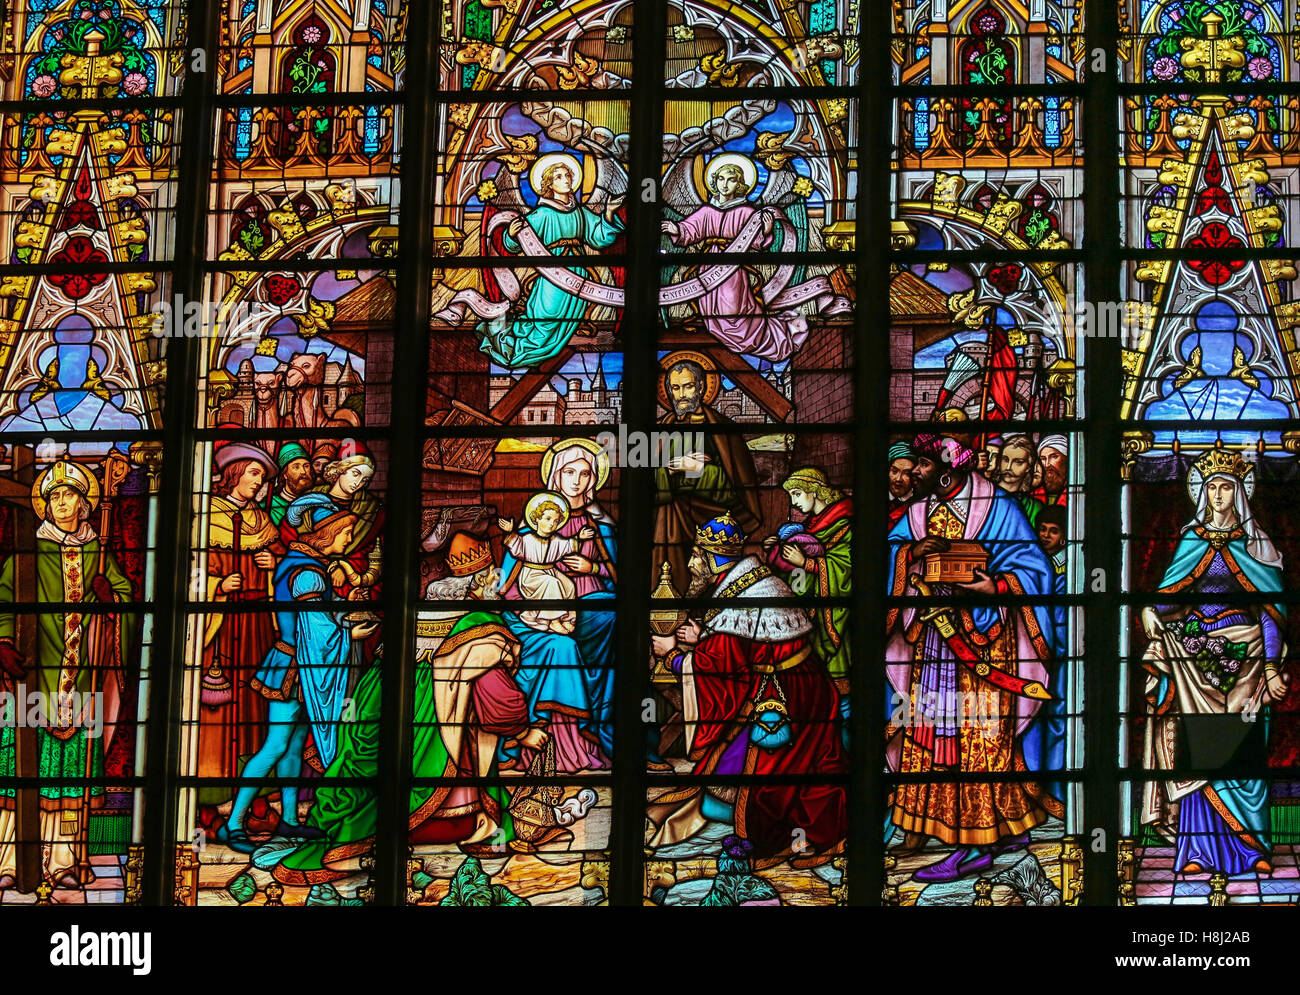 Stained Glass window depicting the Epiphany, the Visit of the Three Kings in Bethlehem, in the Cathedral of St Rumbold of Mechel Stock Photo